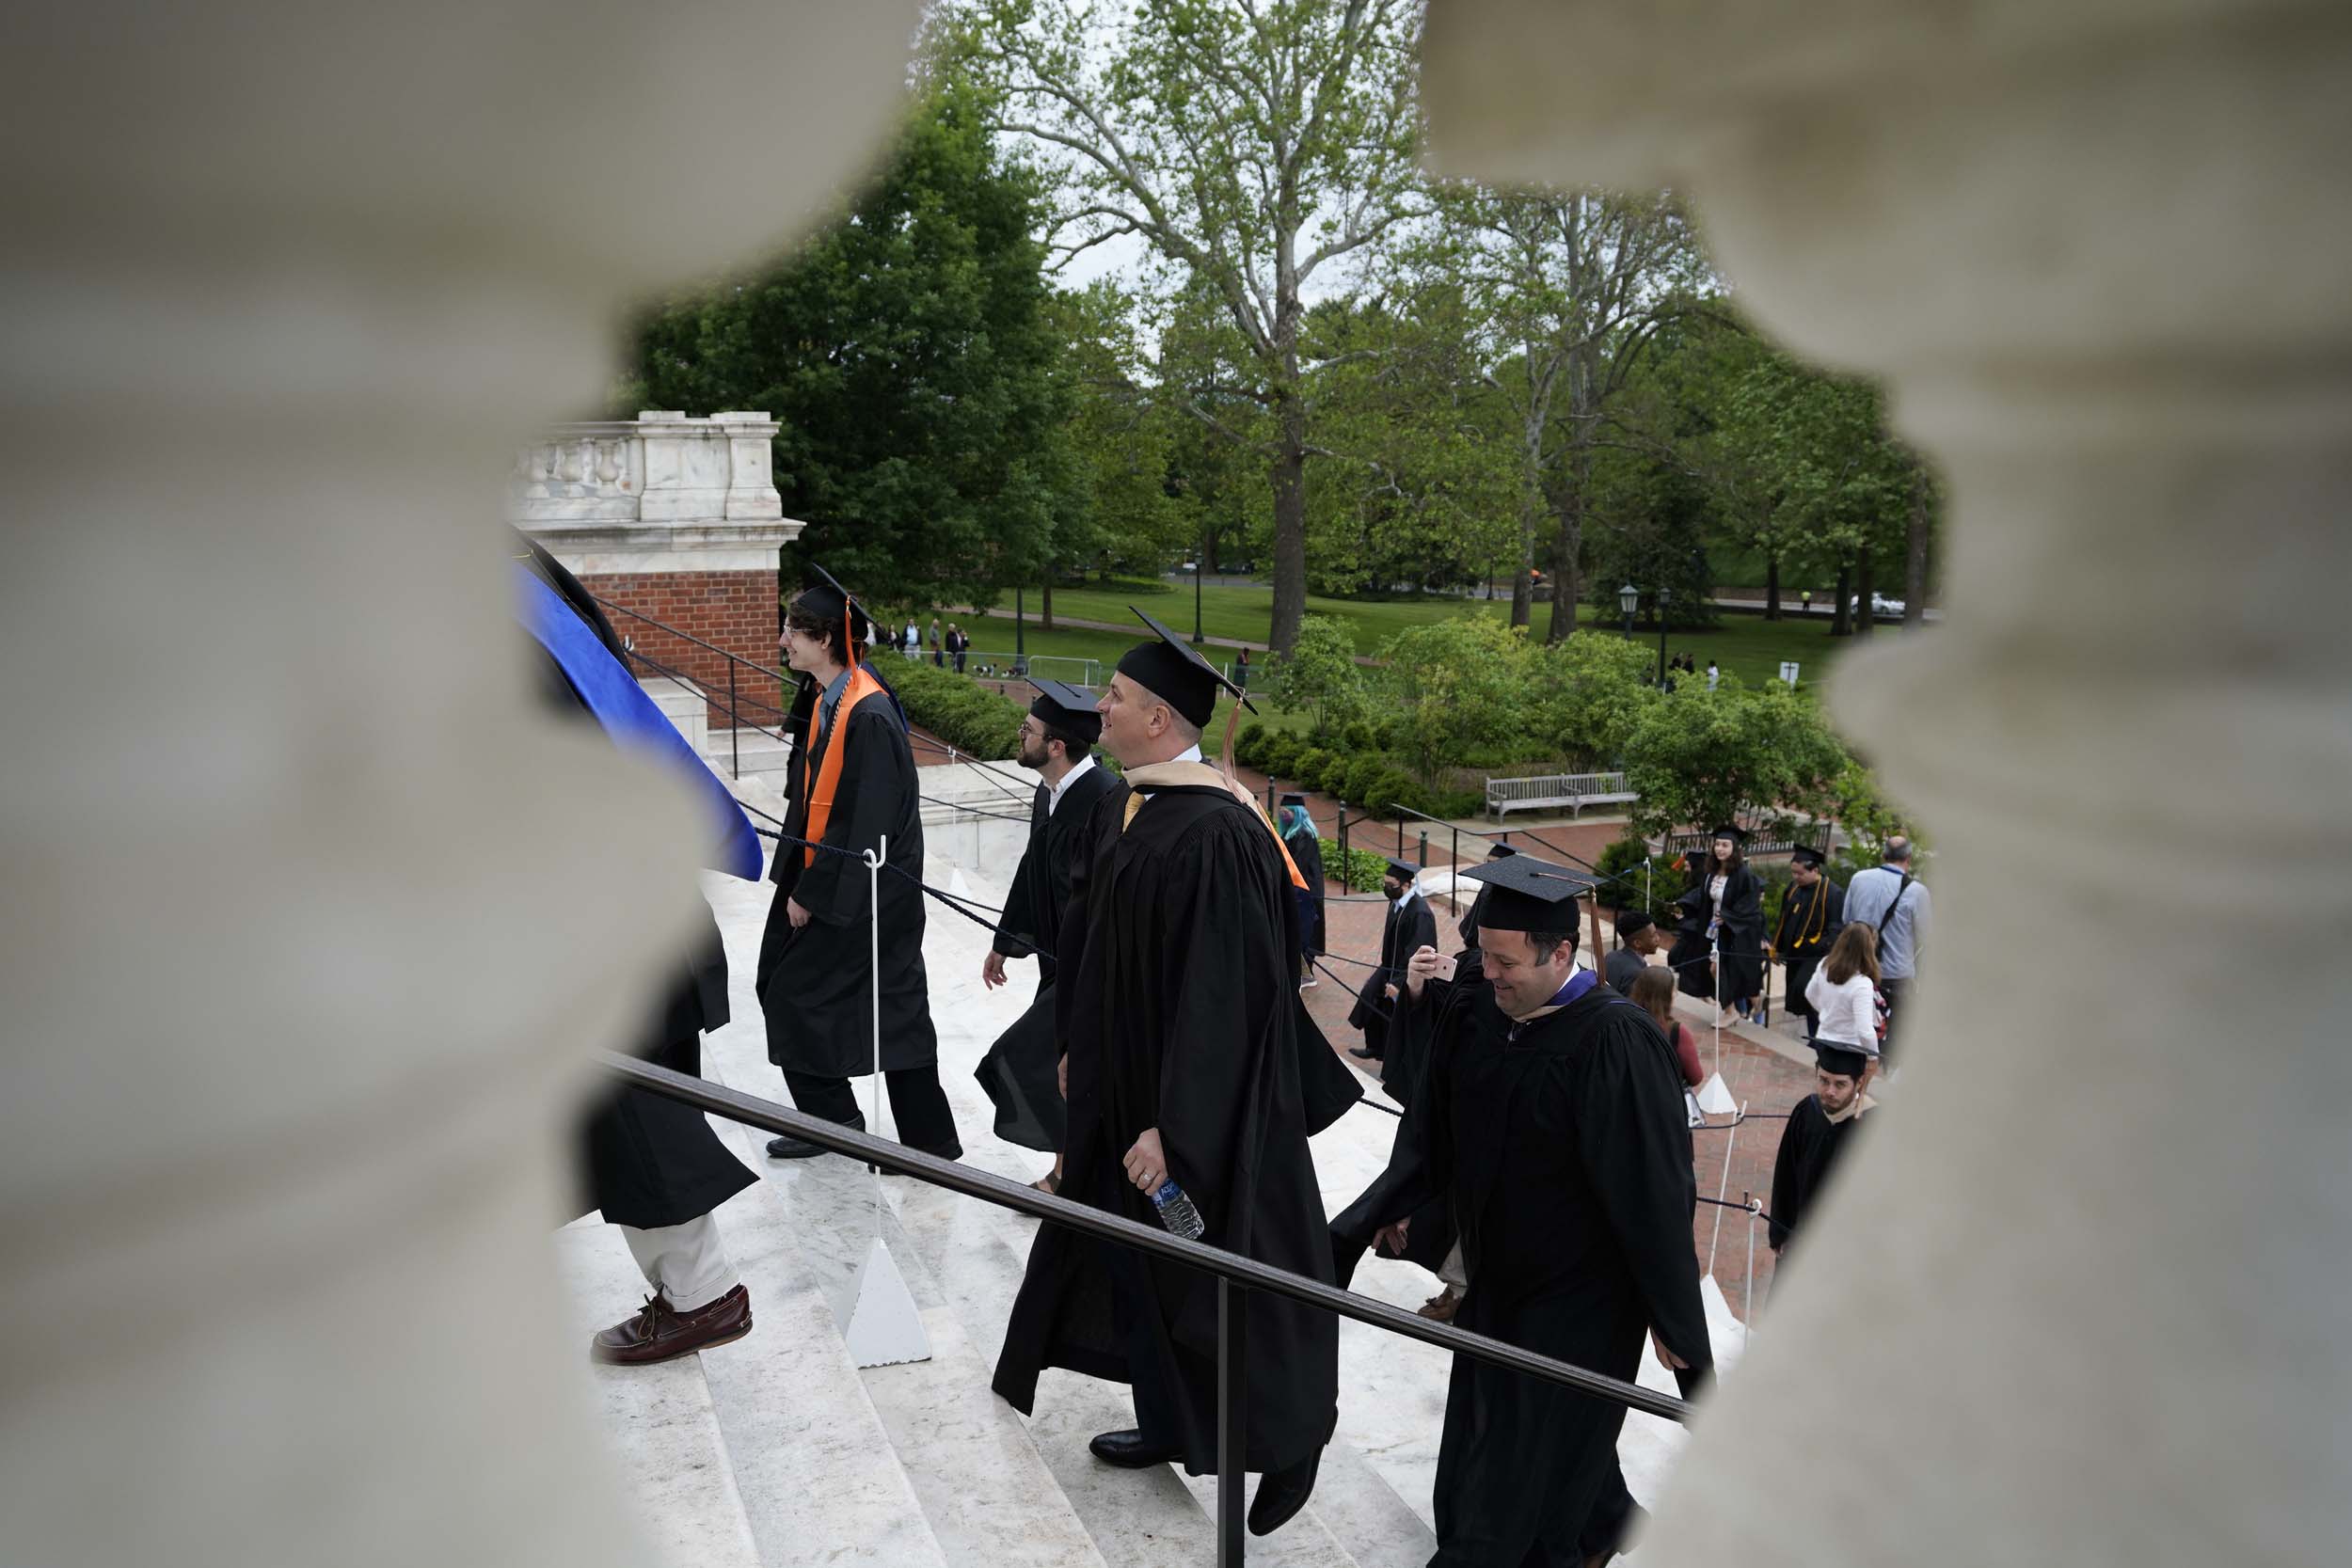 View of the graduates walking up steps taken between two columns